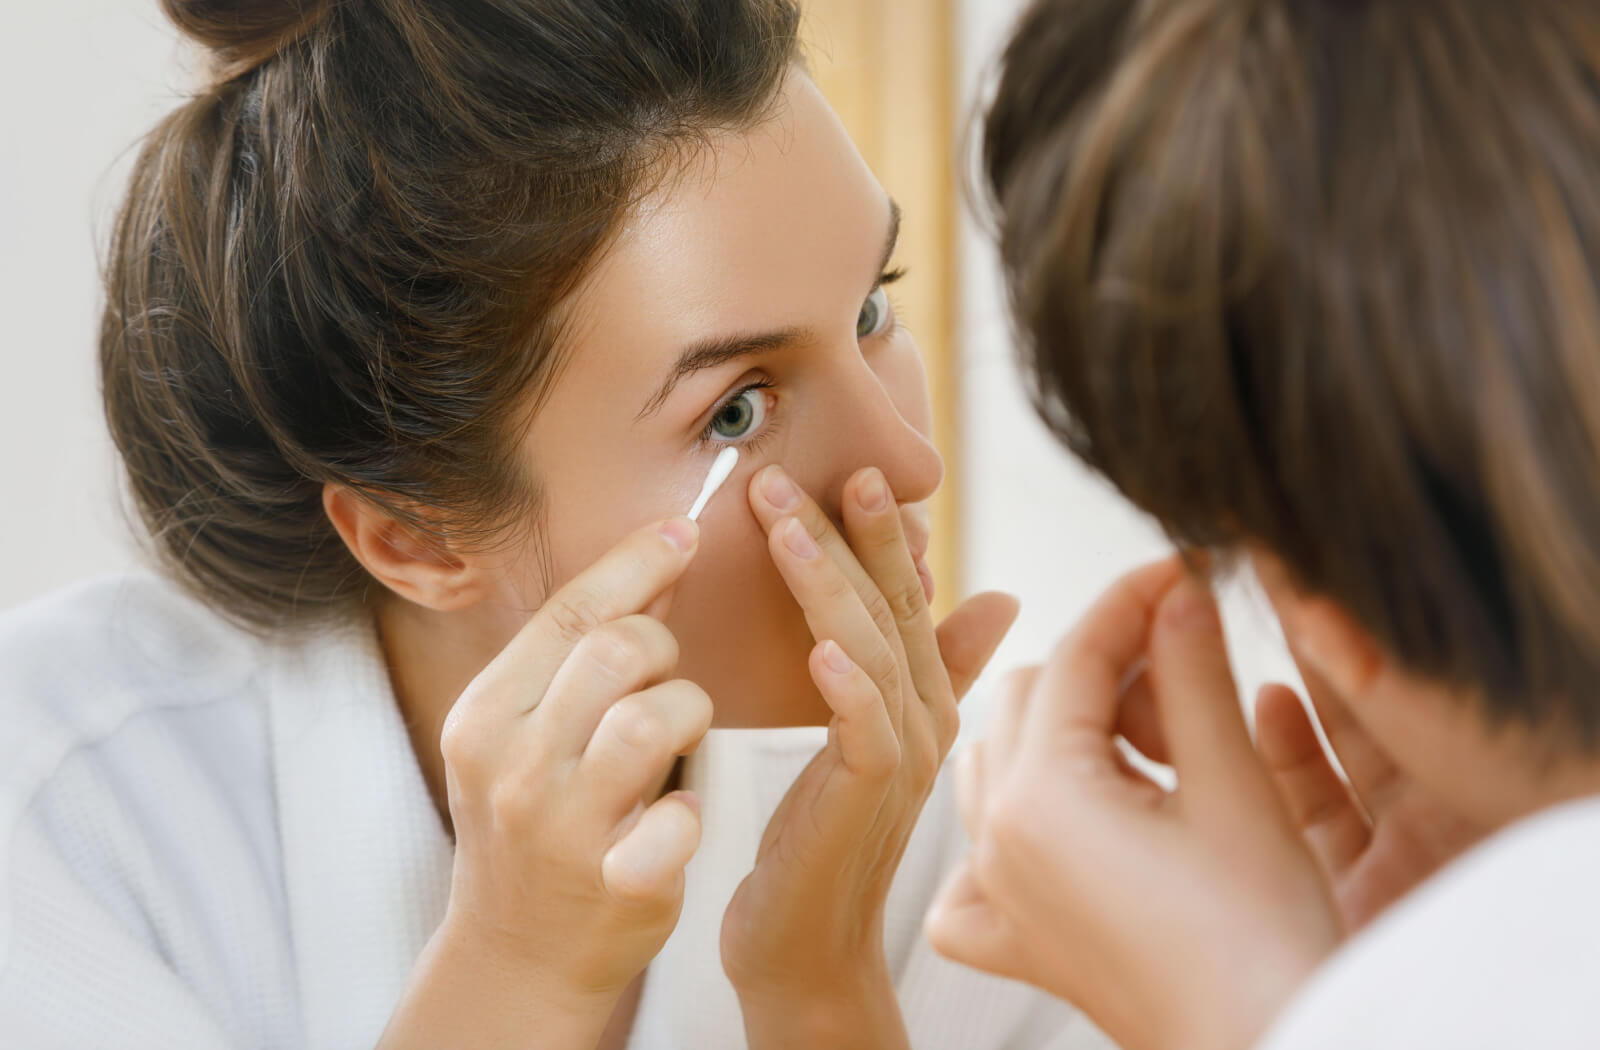 A youthful lady is gently swabbing her eyelids with a cotton swab while standing before a mirror.